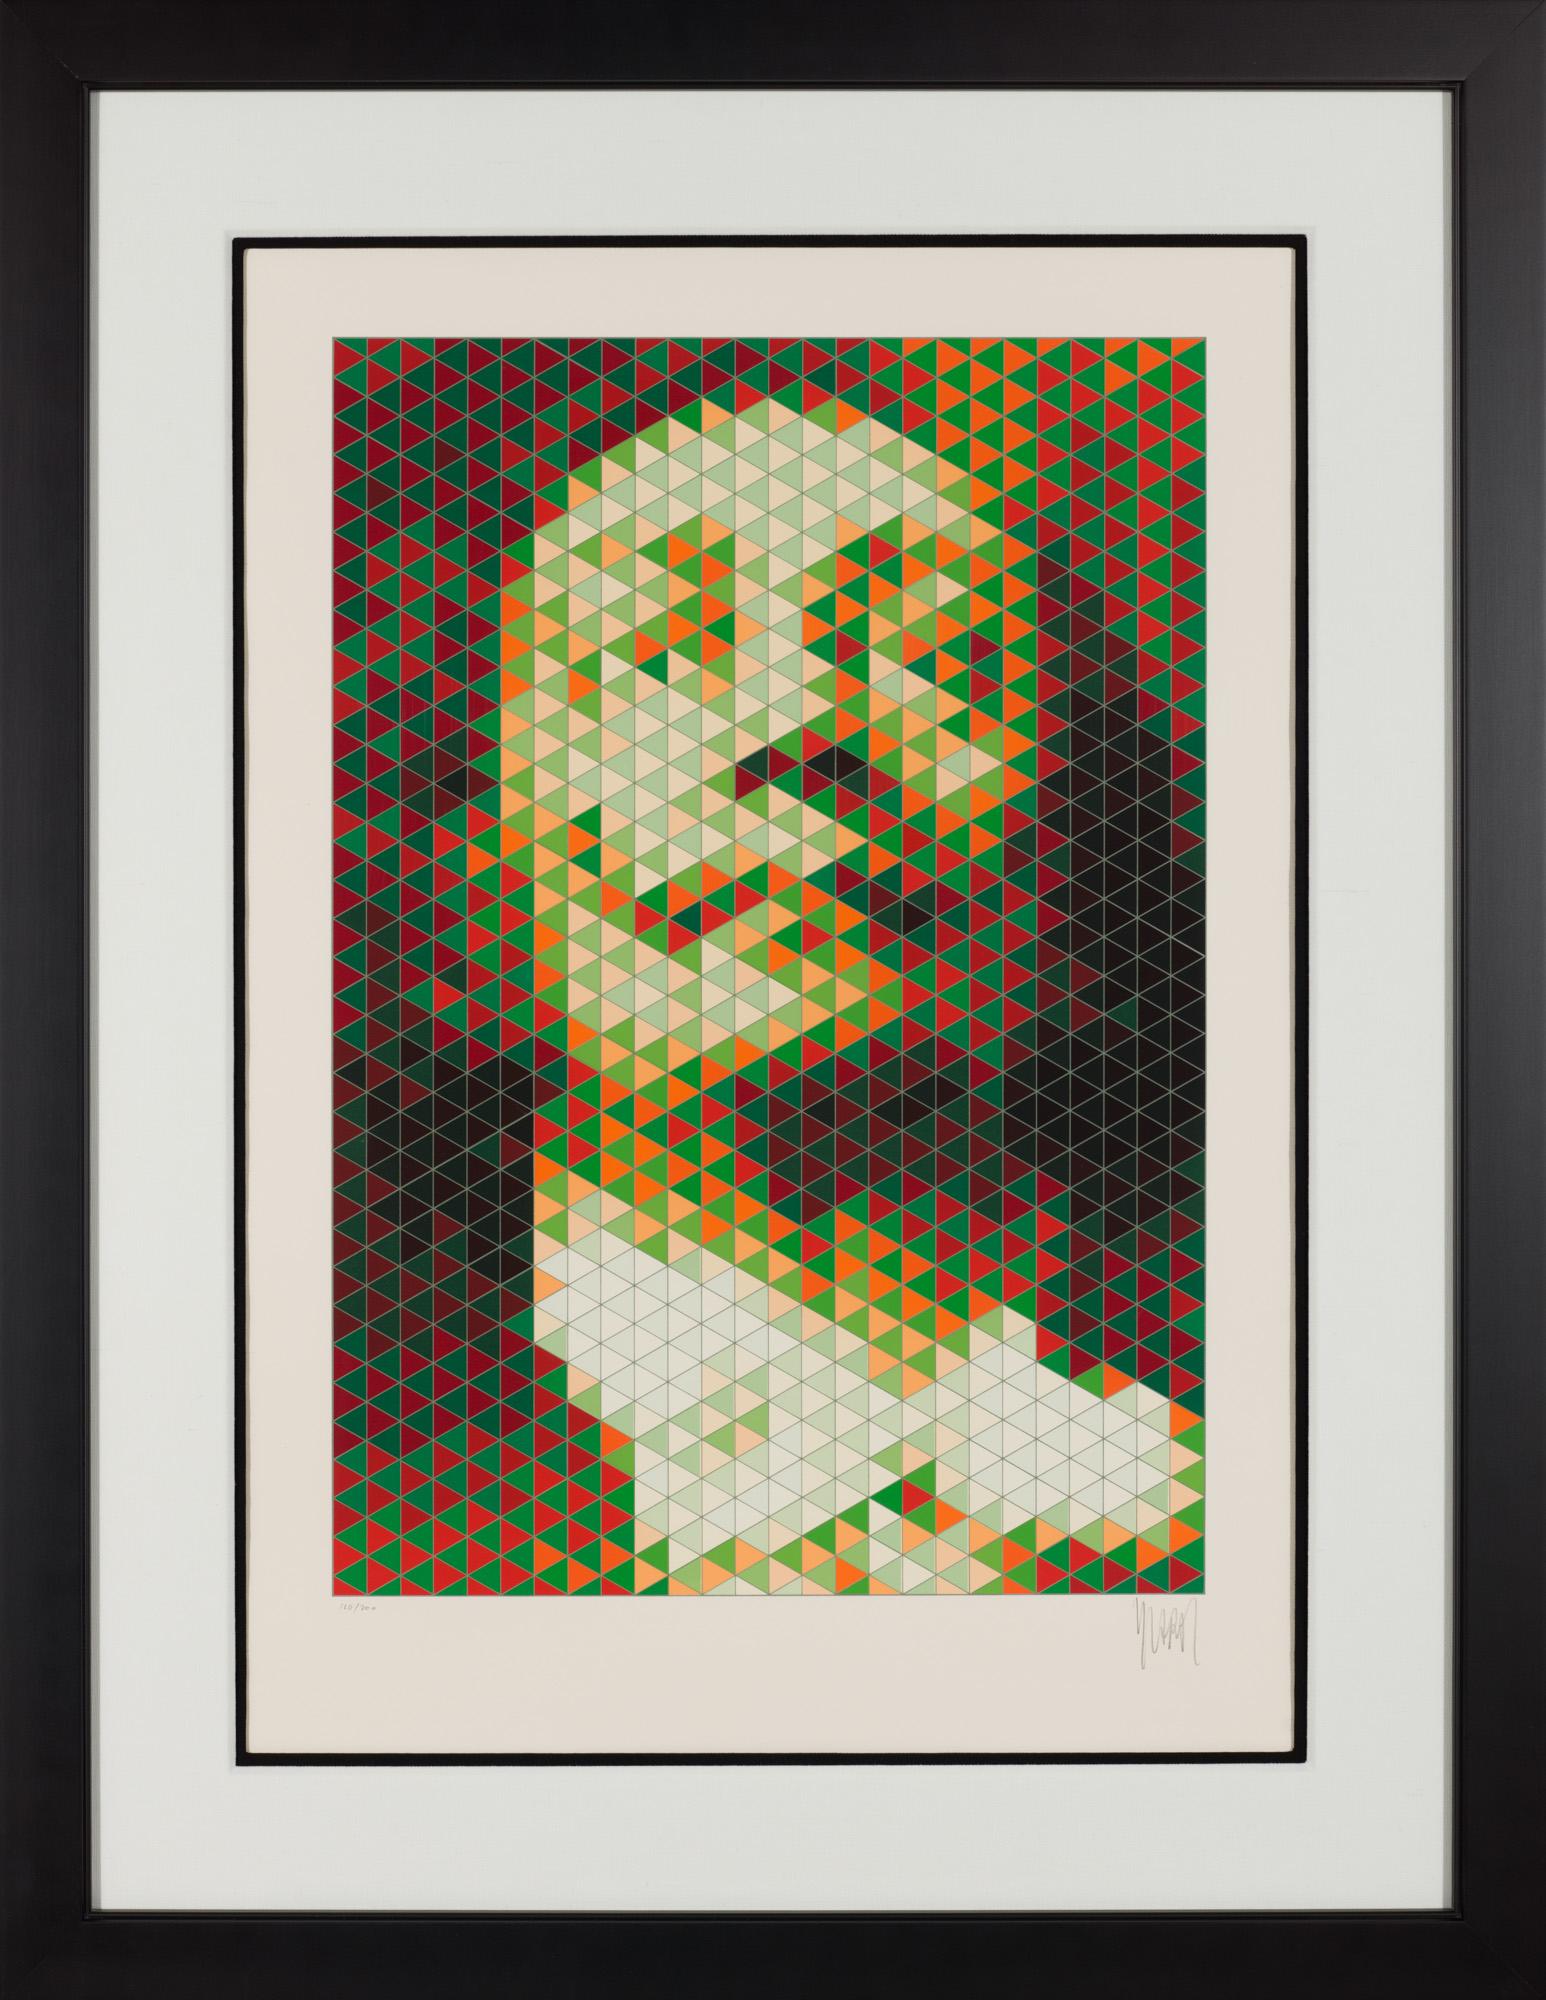 Faces of Dali #4 - Op Art Print by Yvaral (Jean-Pierre Vasarely)